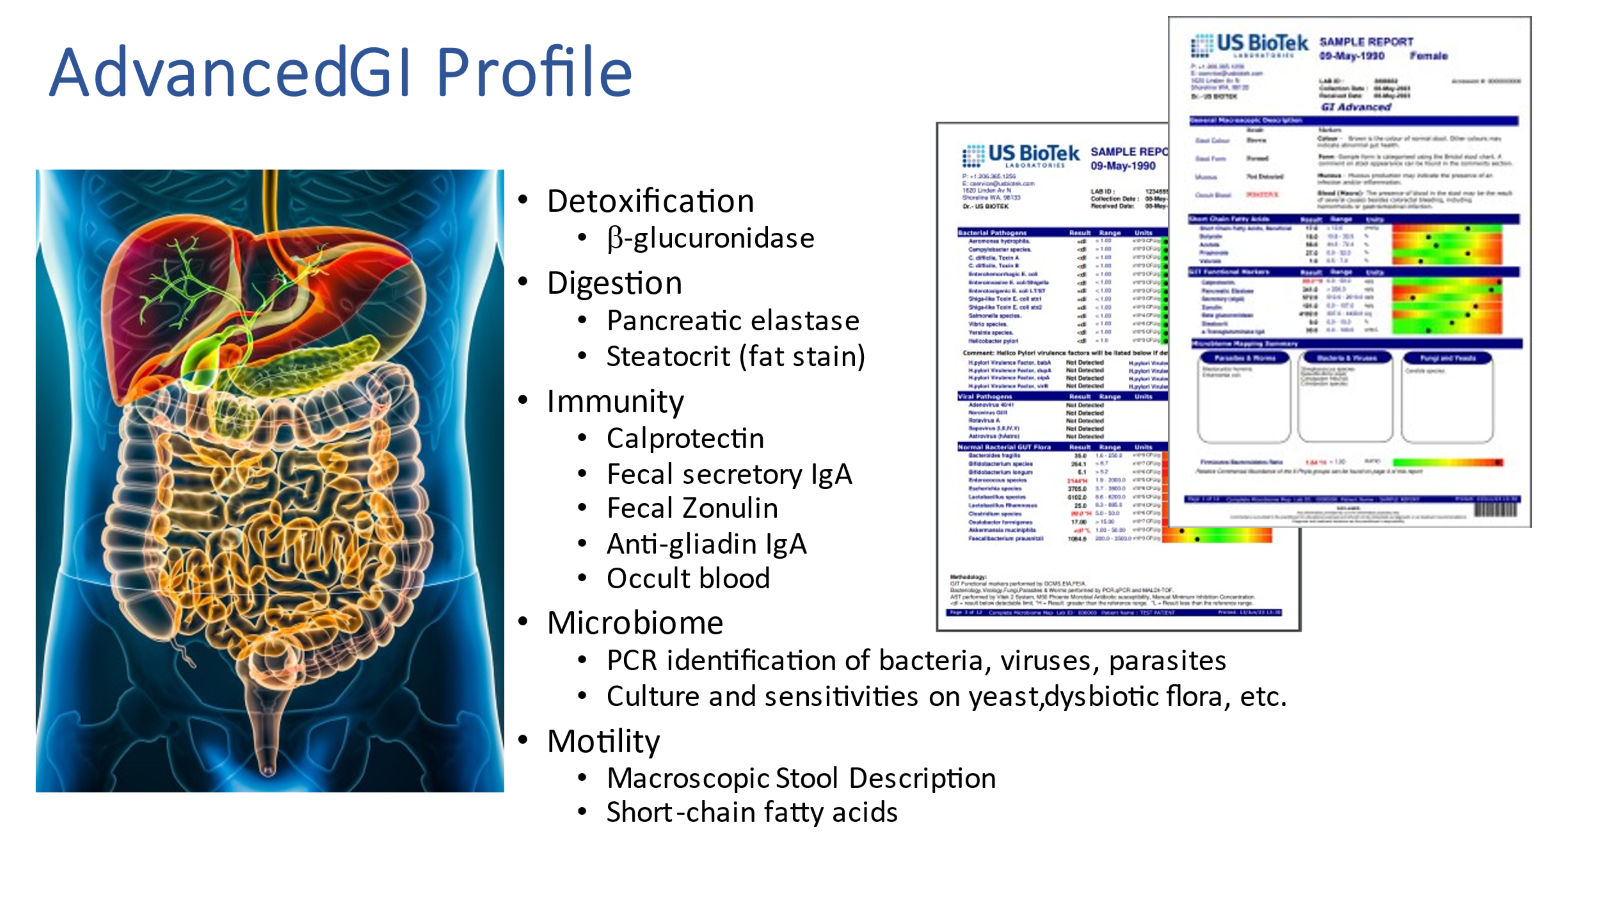 Why go with the Advance GI Microbiome Profile